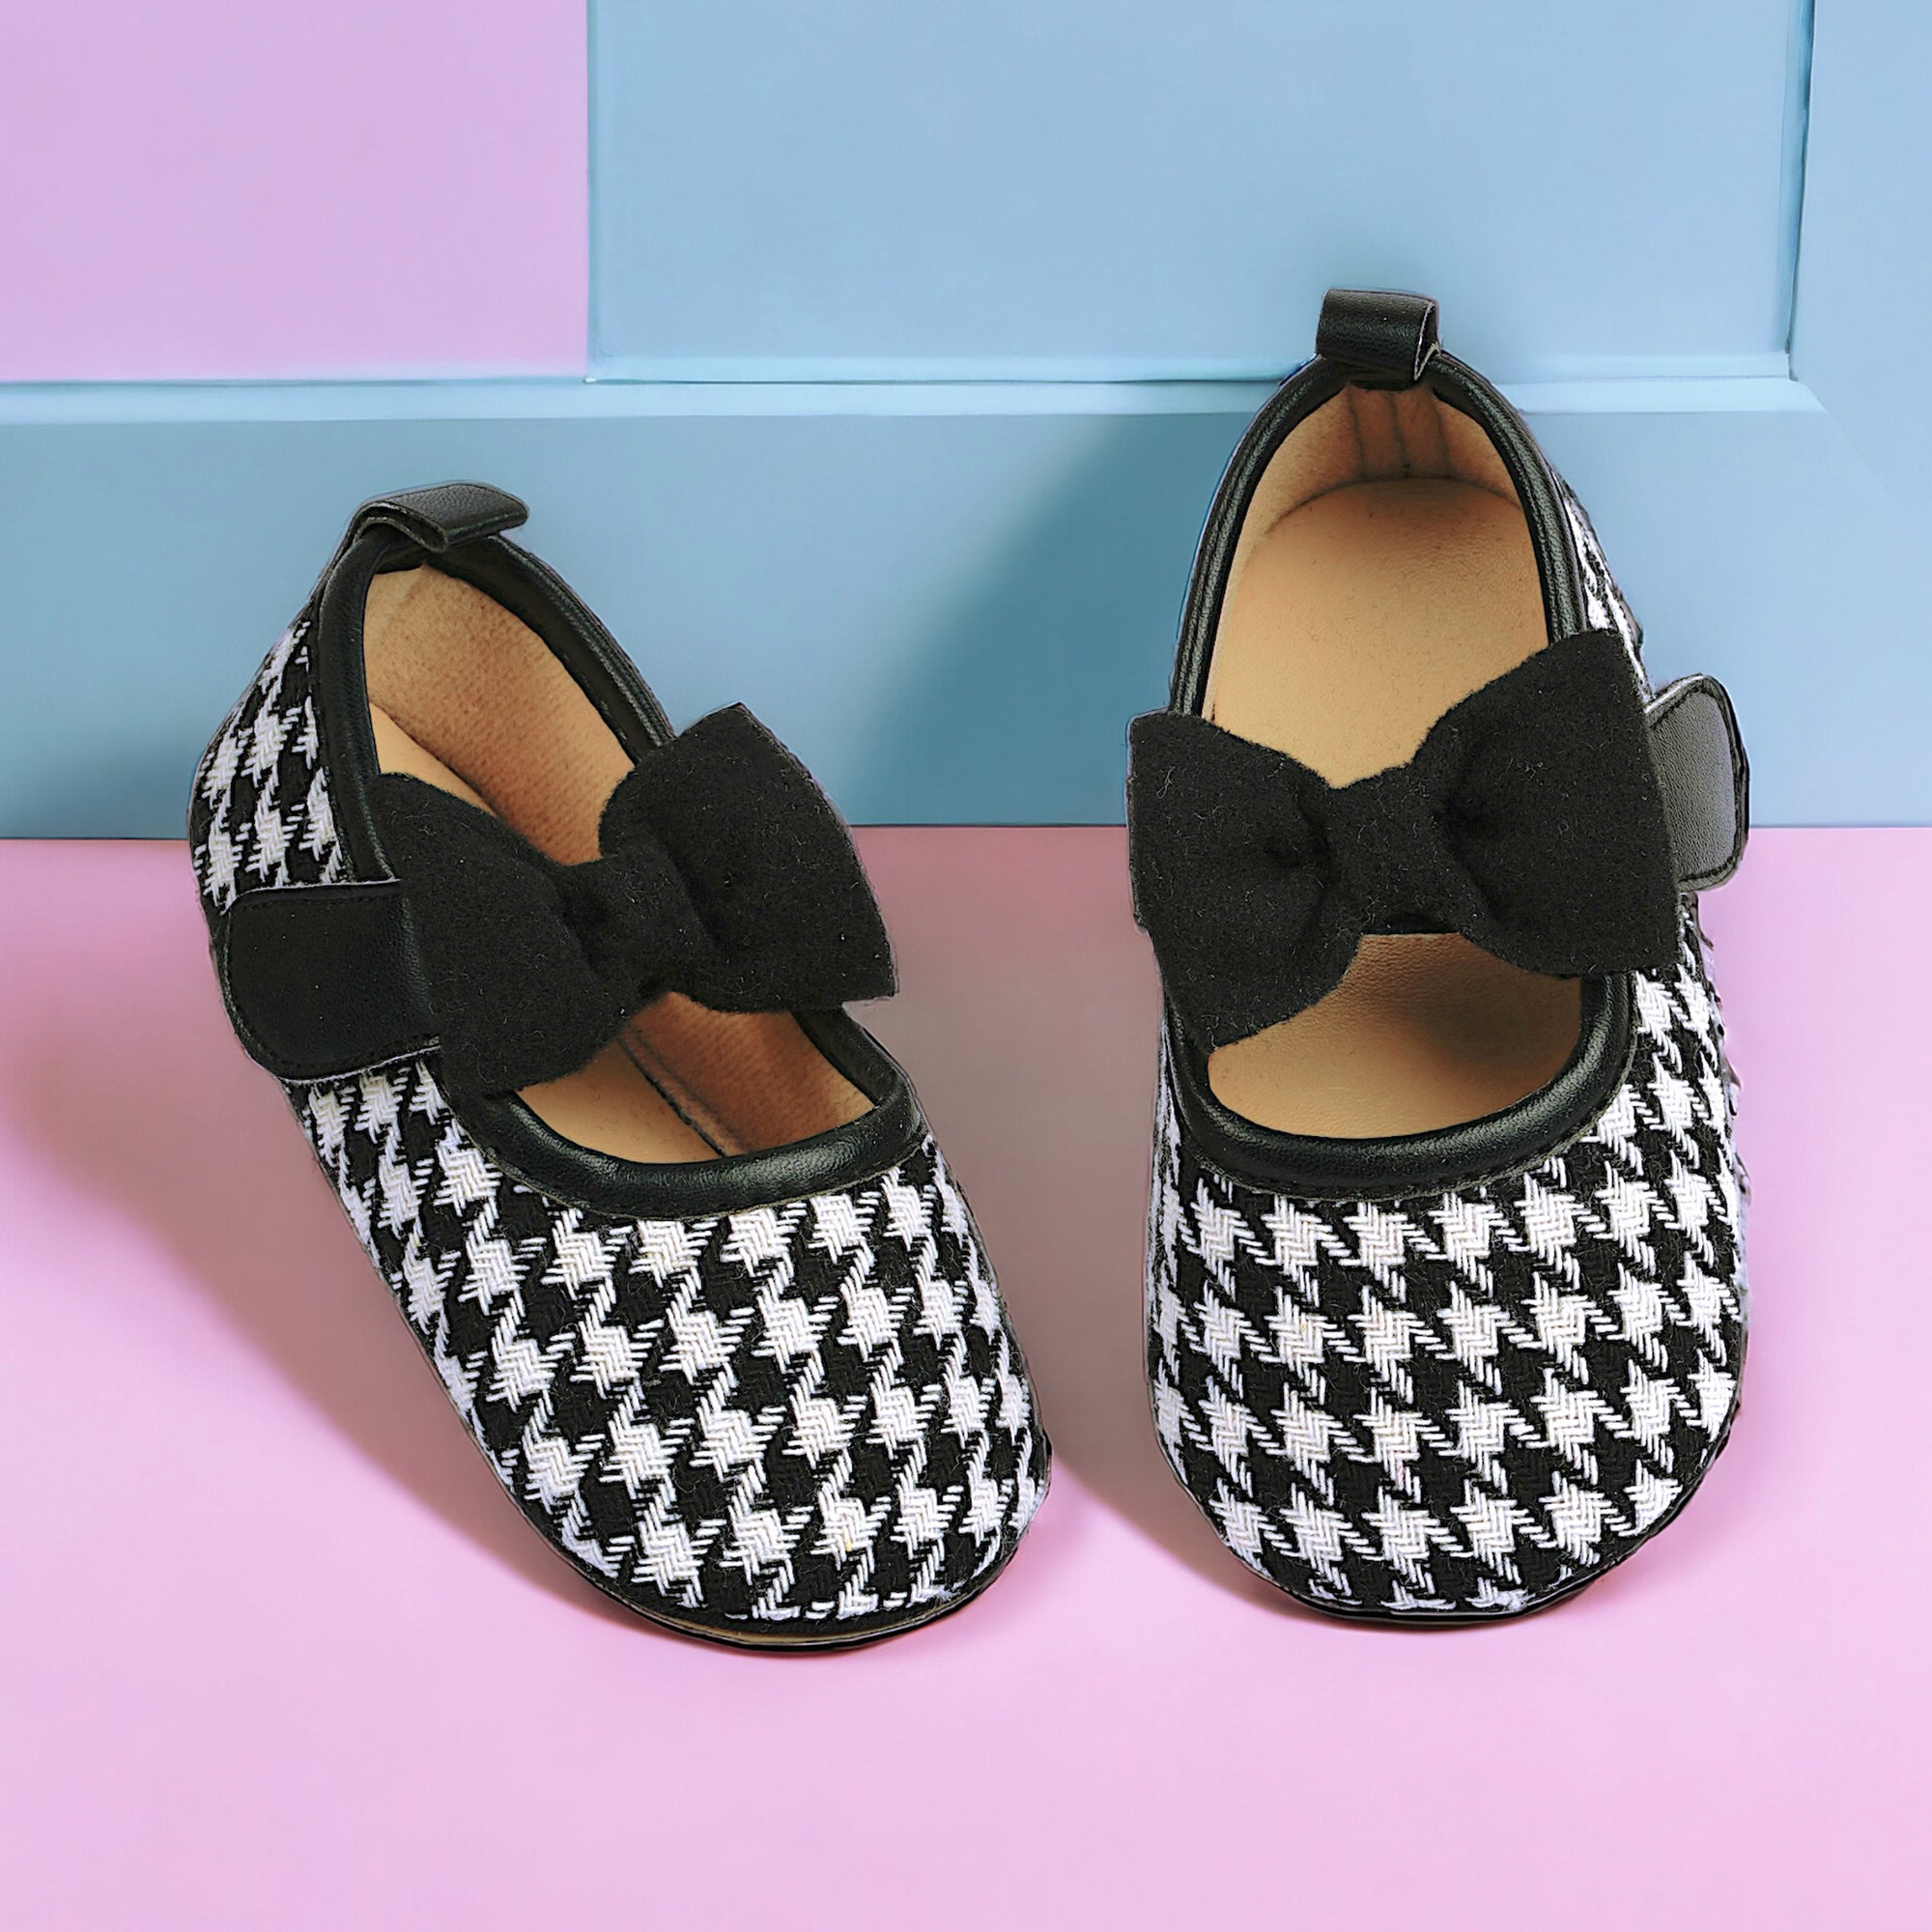 Baby Moo Houndstooth Print with Bow Velcro Strap Ballerina Booties - Black